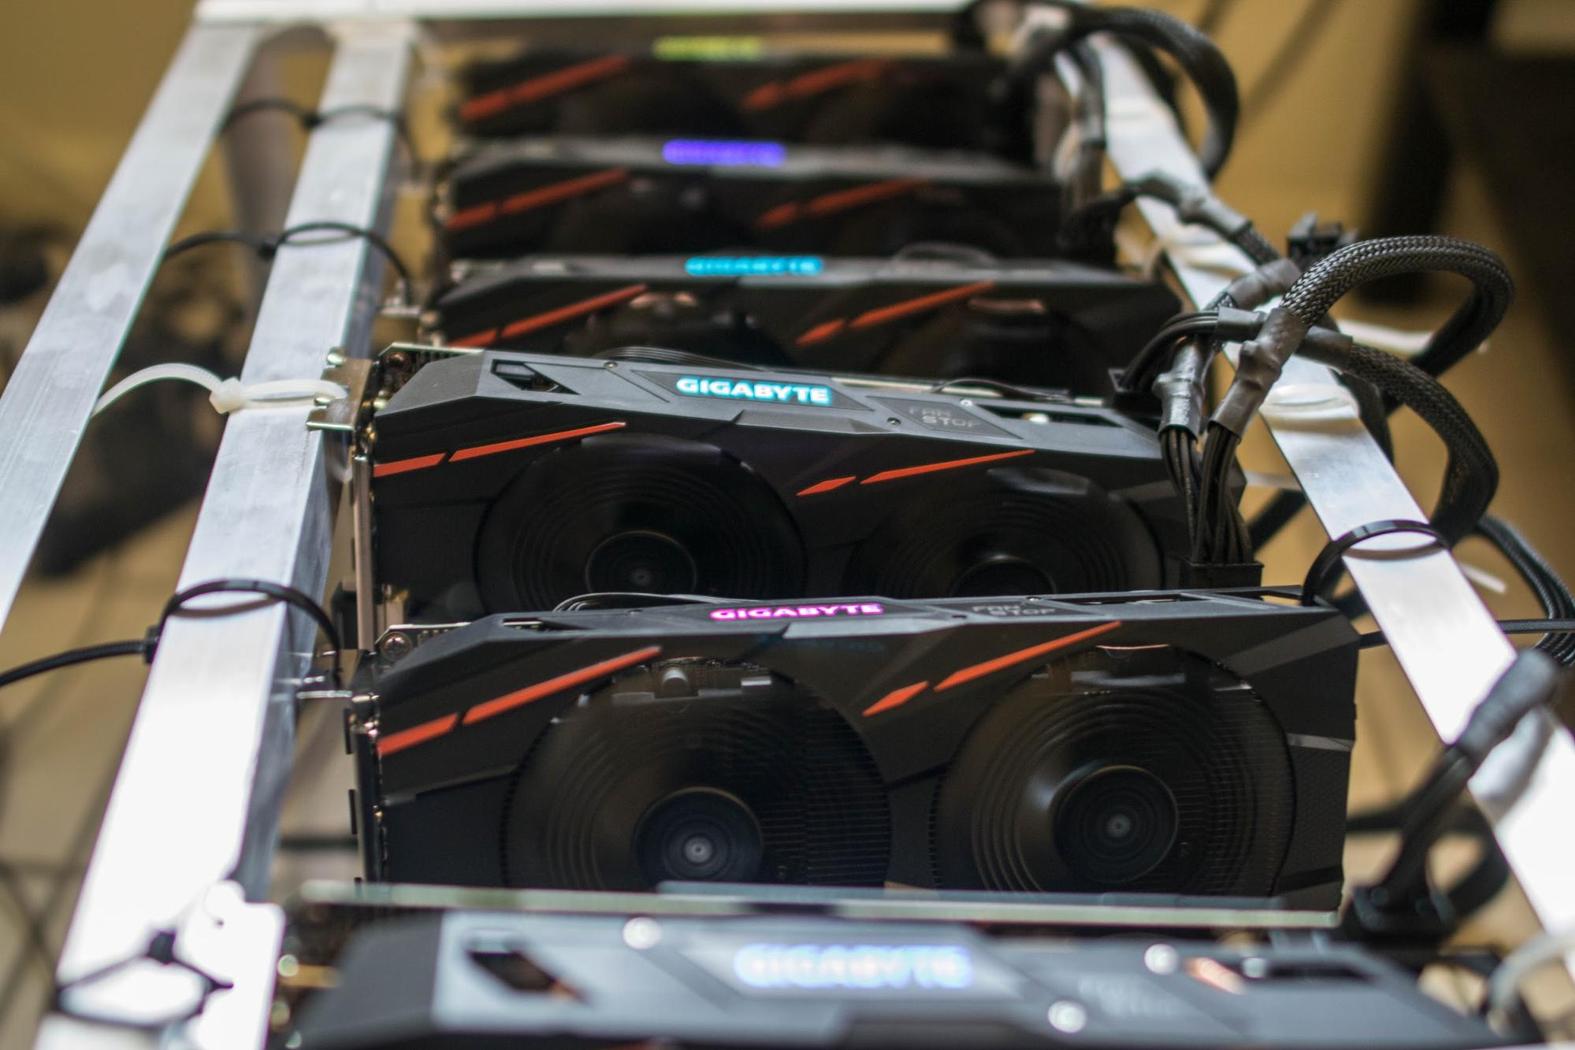 Pressure Mounts for Ethereum Developers as ASIC Miners Begin Dominating Hashrates